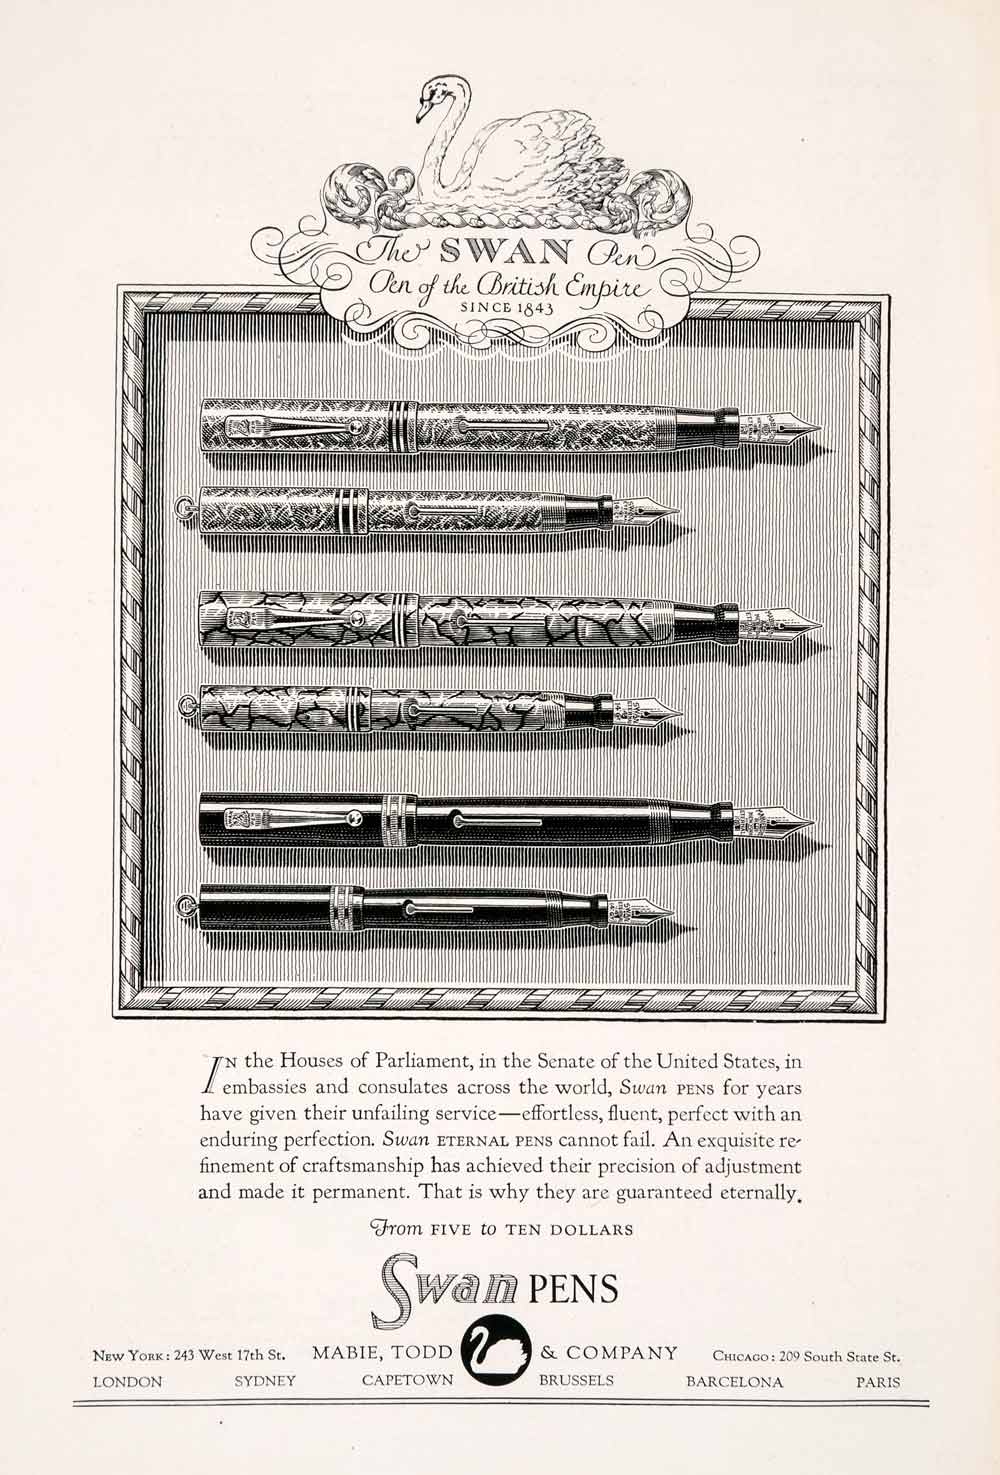 1929 Ad Antique Mabie Todd Swan Fountain Pens Models Writing British Empire NGM4